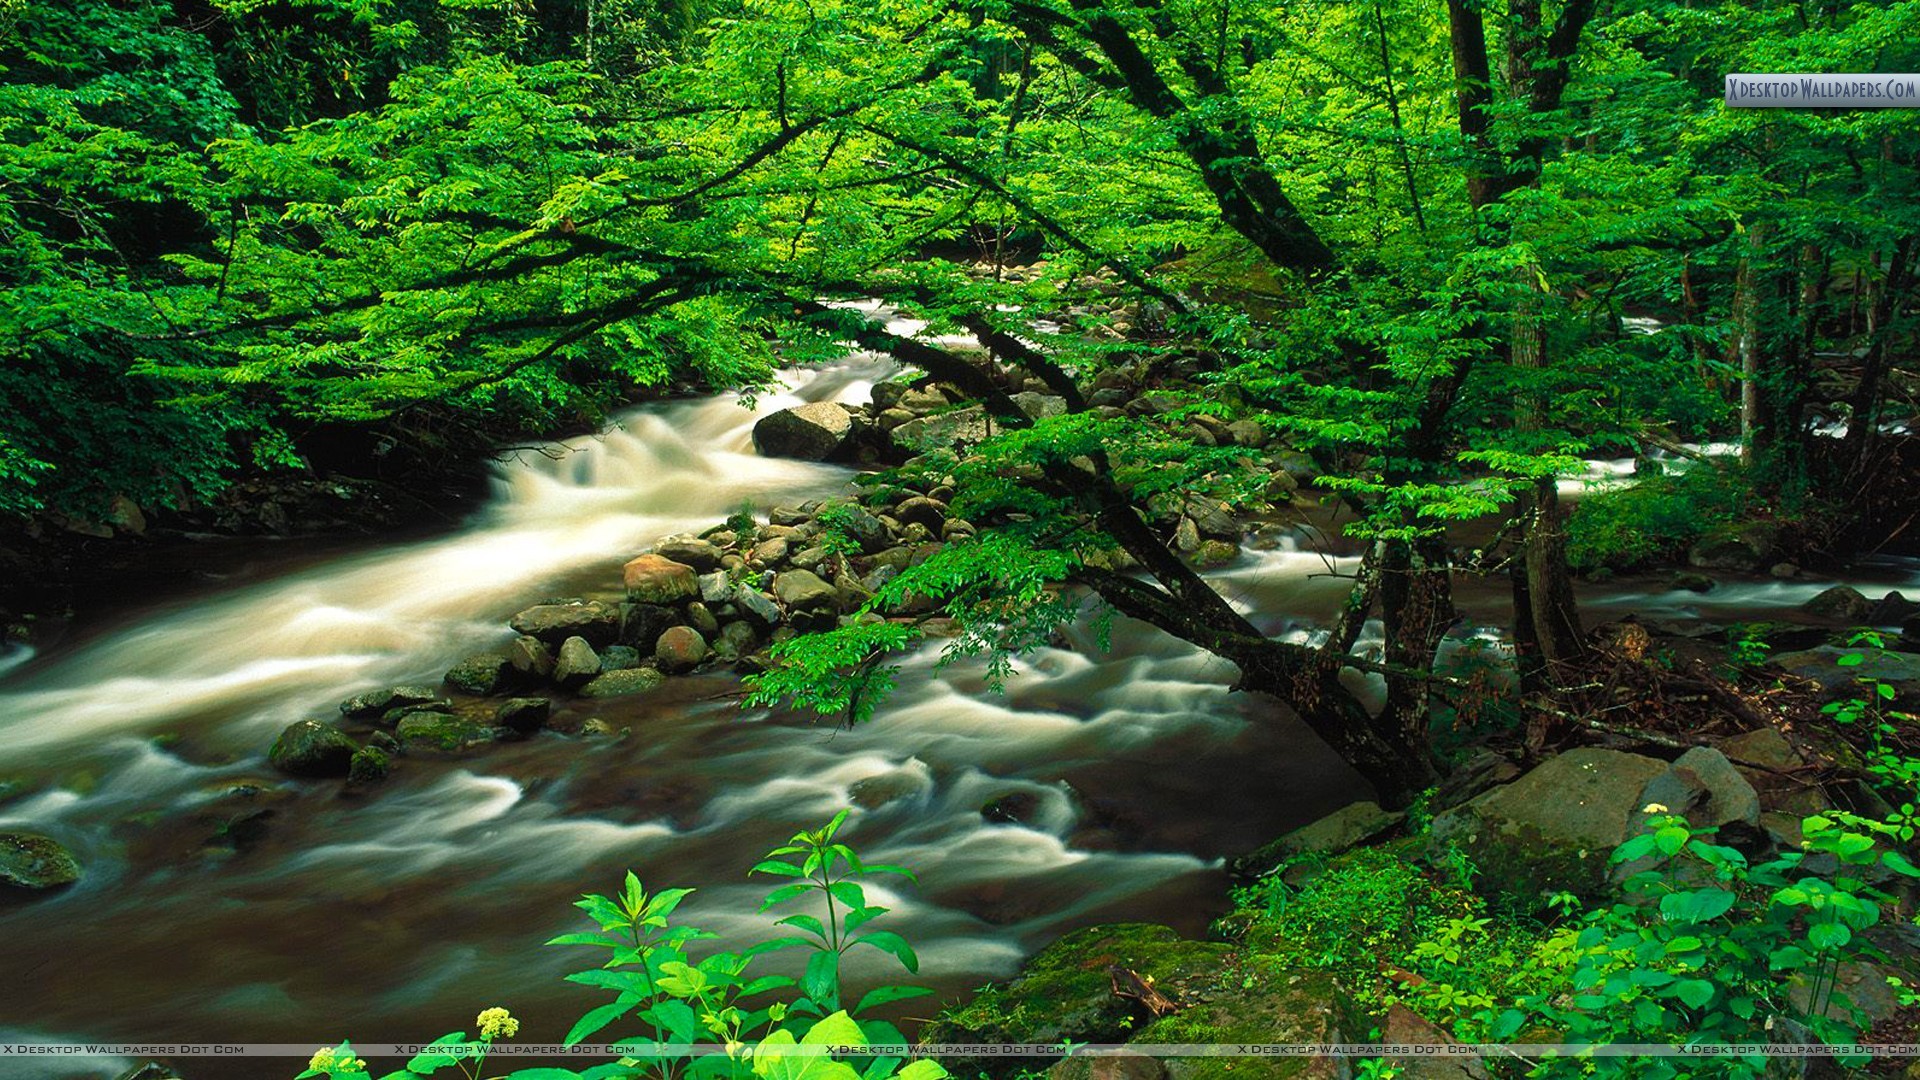 1920x1080 You are viewing wallpaper titled "Tremont, Great Smoky Mountains ...